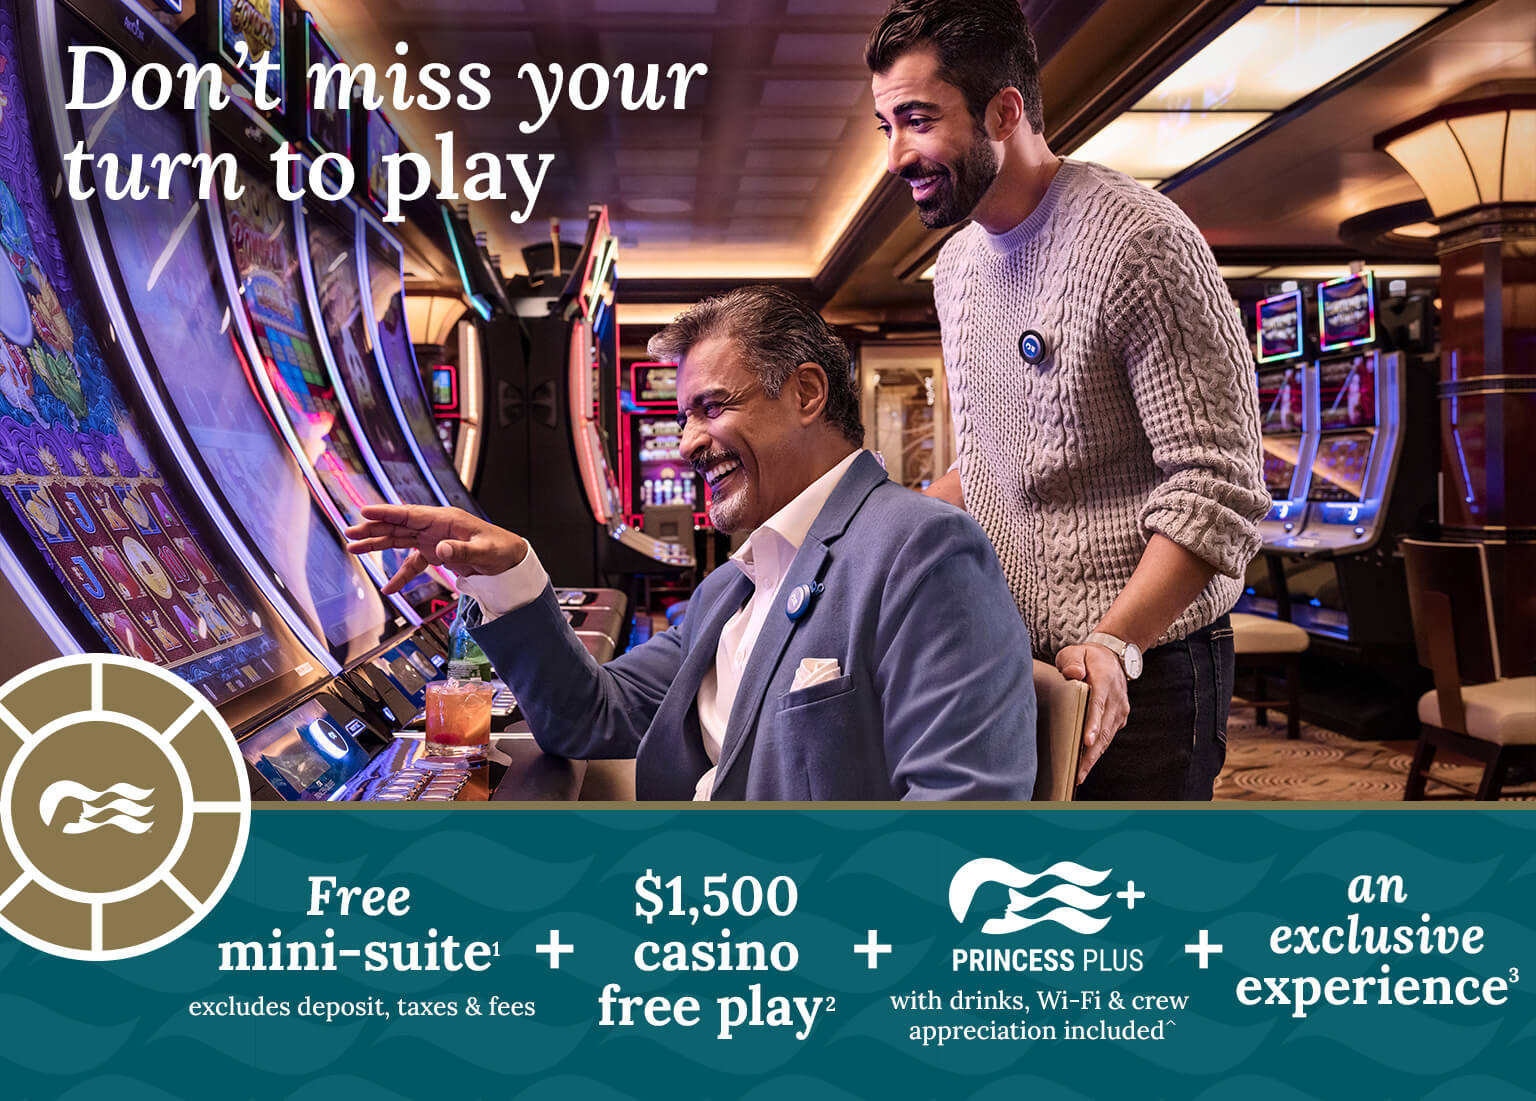 Group of people playing slots. free mini-suite, excludes taxes, deposit & fees. Click here to book.